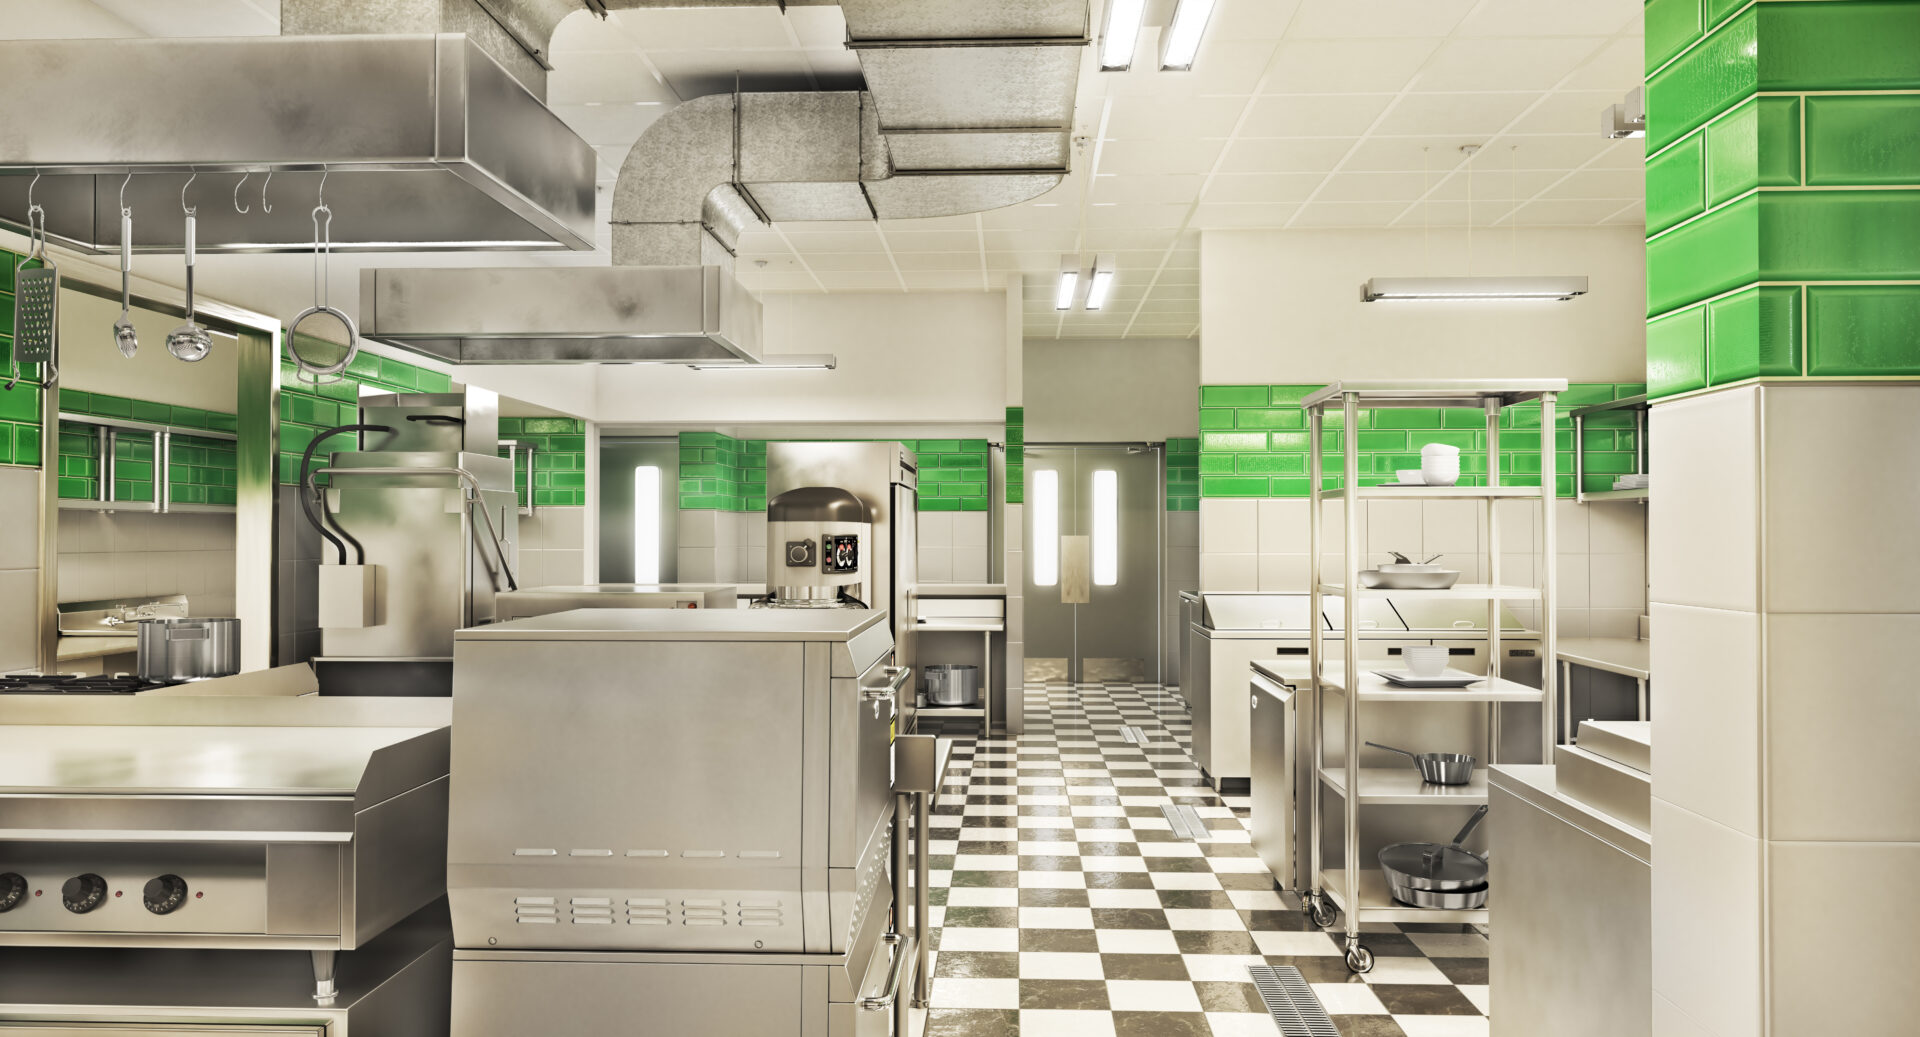 A kitchen with many different appliances and green lights.